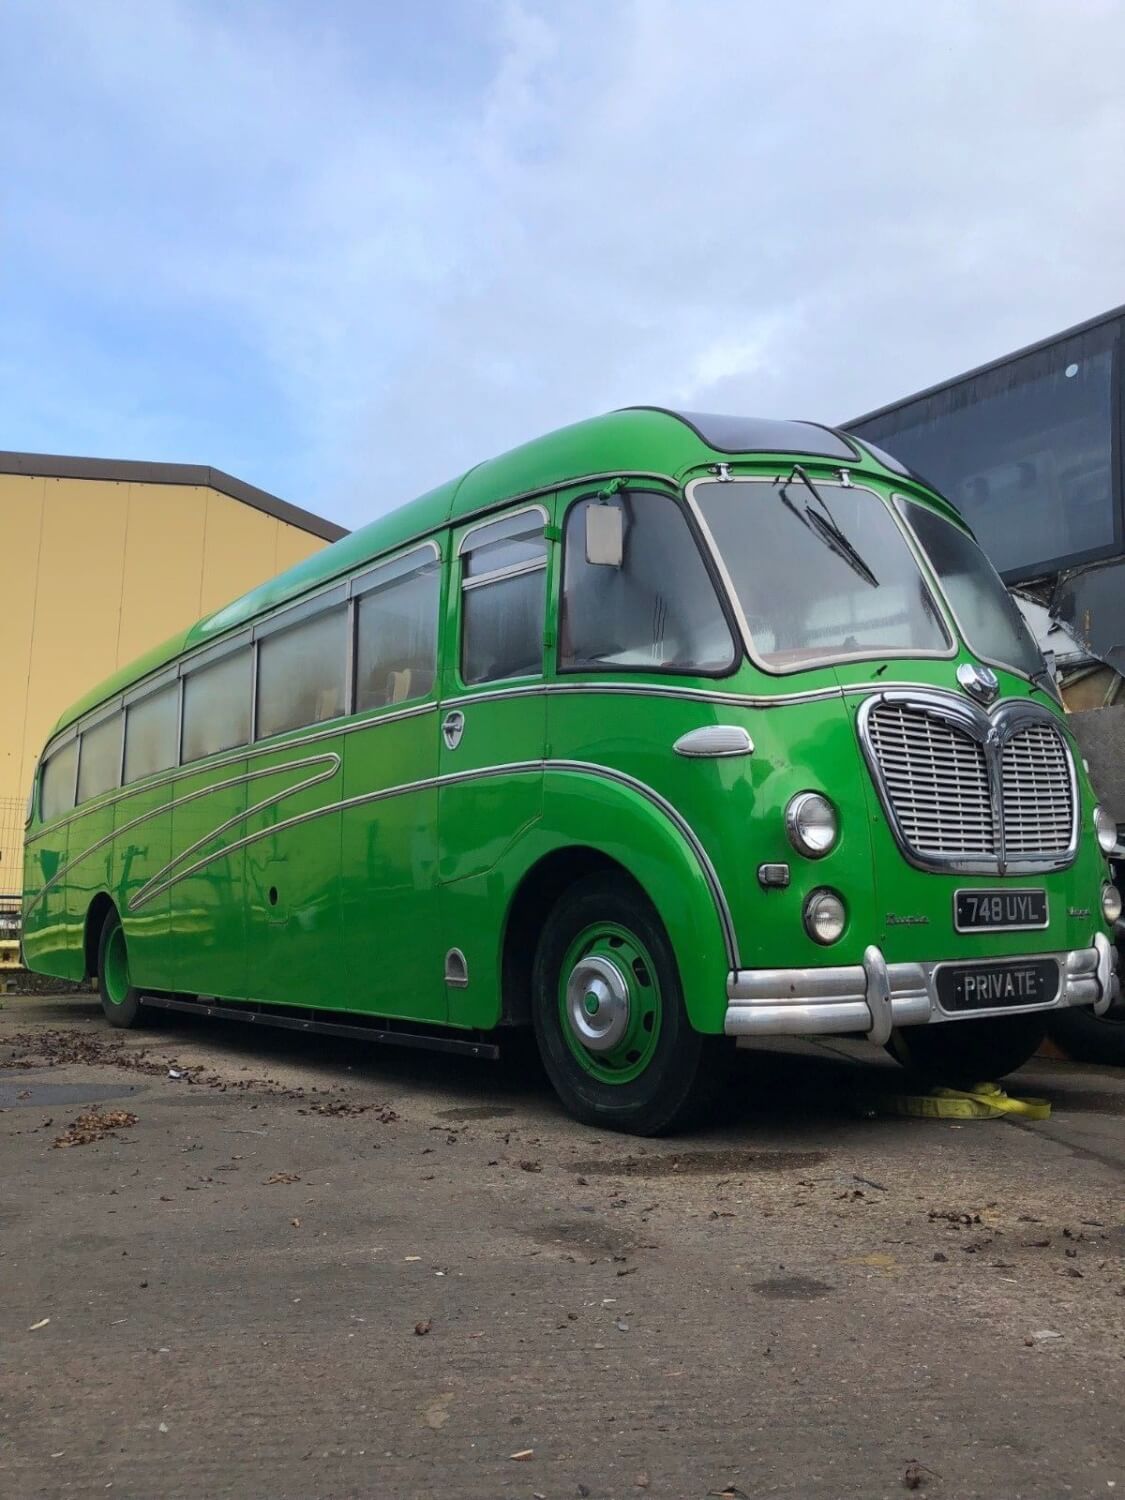 Bedford SBG for sale in Britain after New Zealand authorities failed to licence it for passenger carrying.